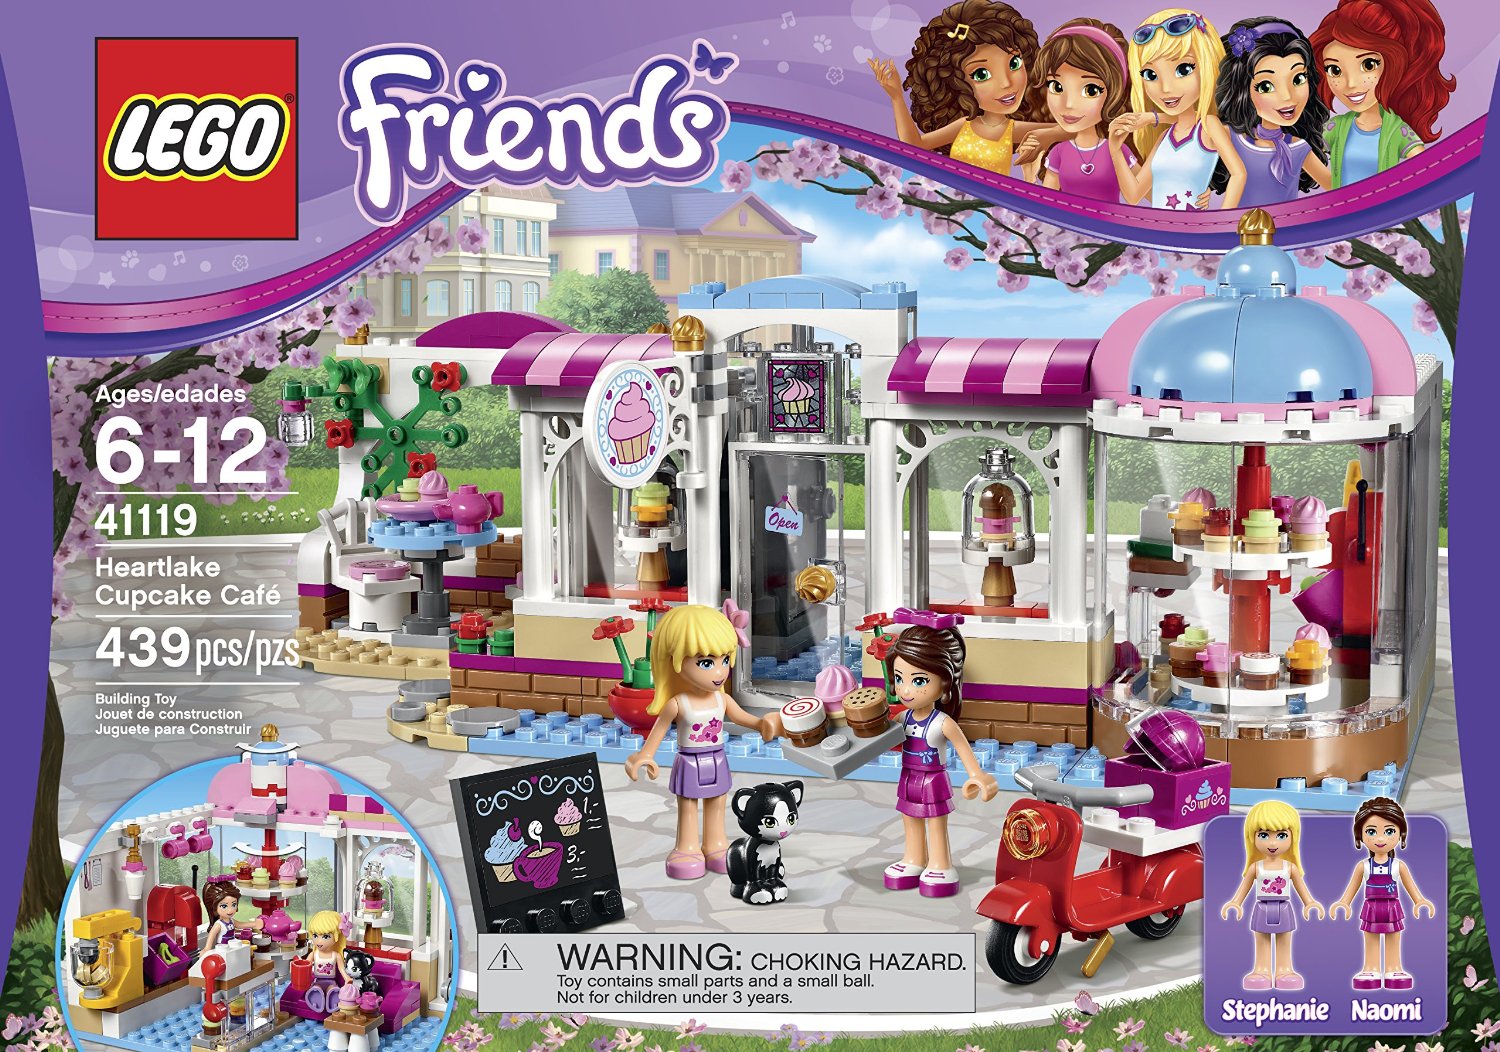 Shopping For LEGO Friends Heartlake Cupcake Cafe Building Kit?